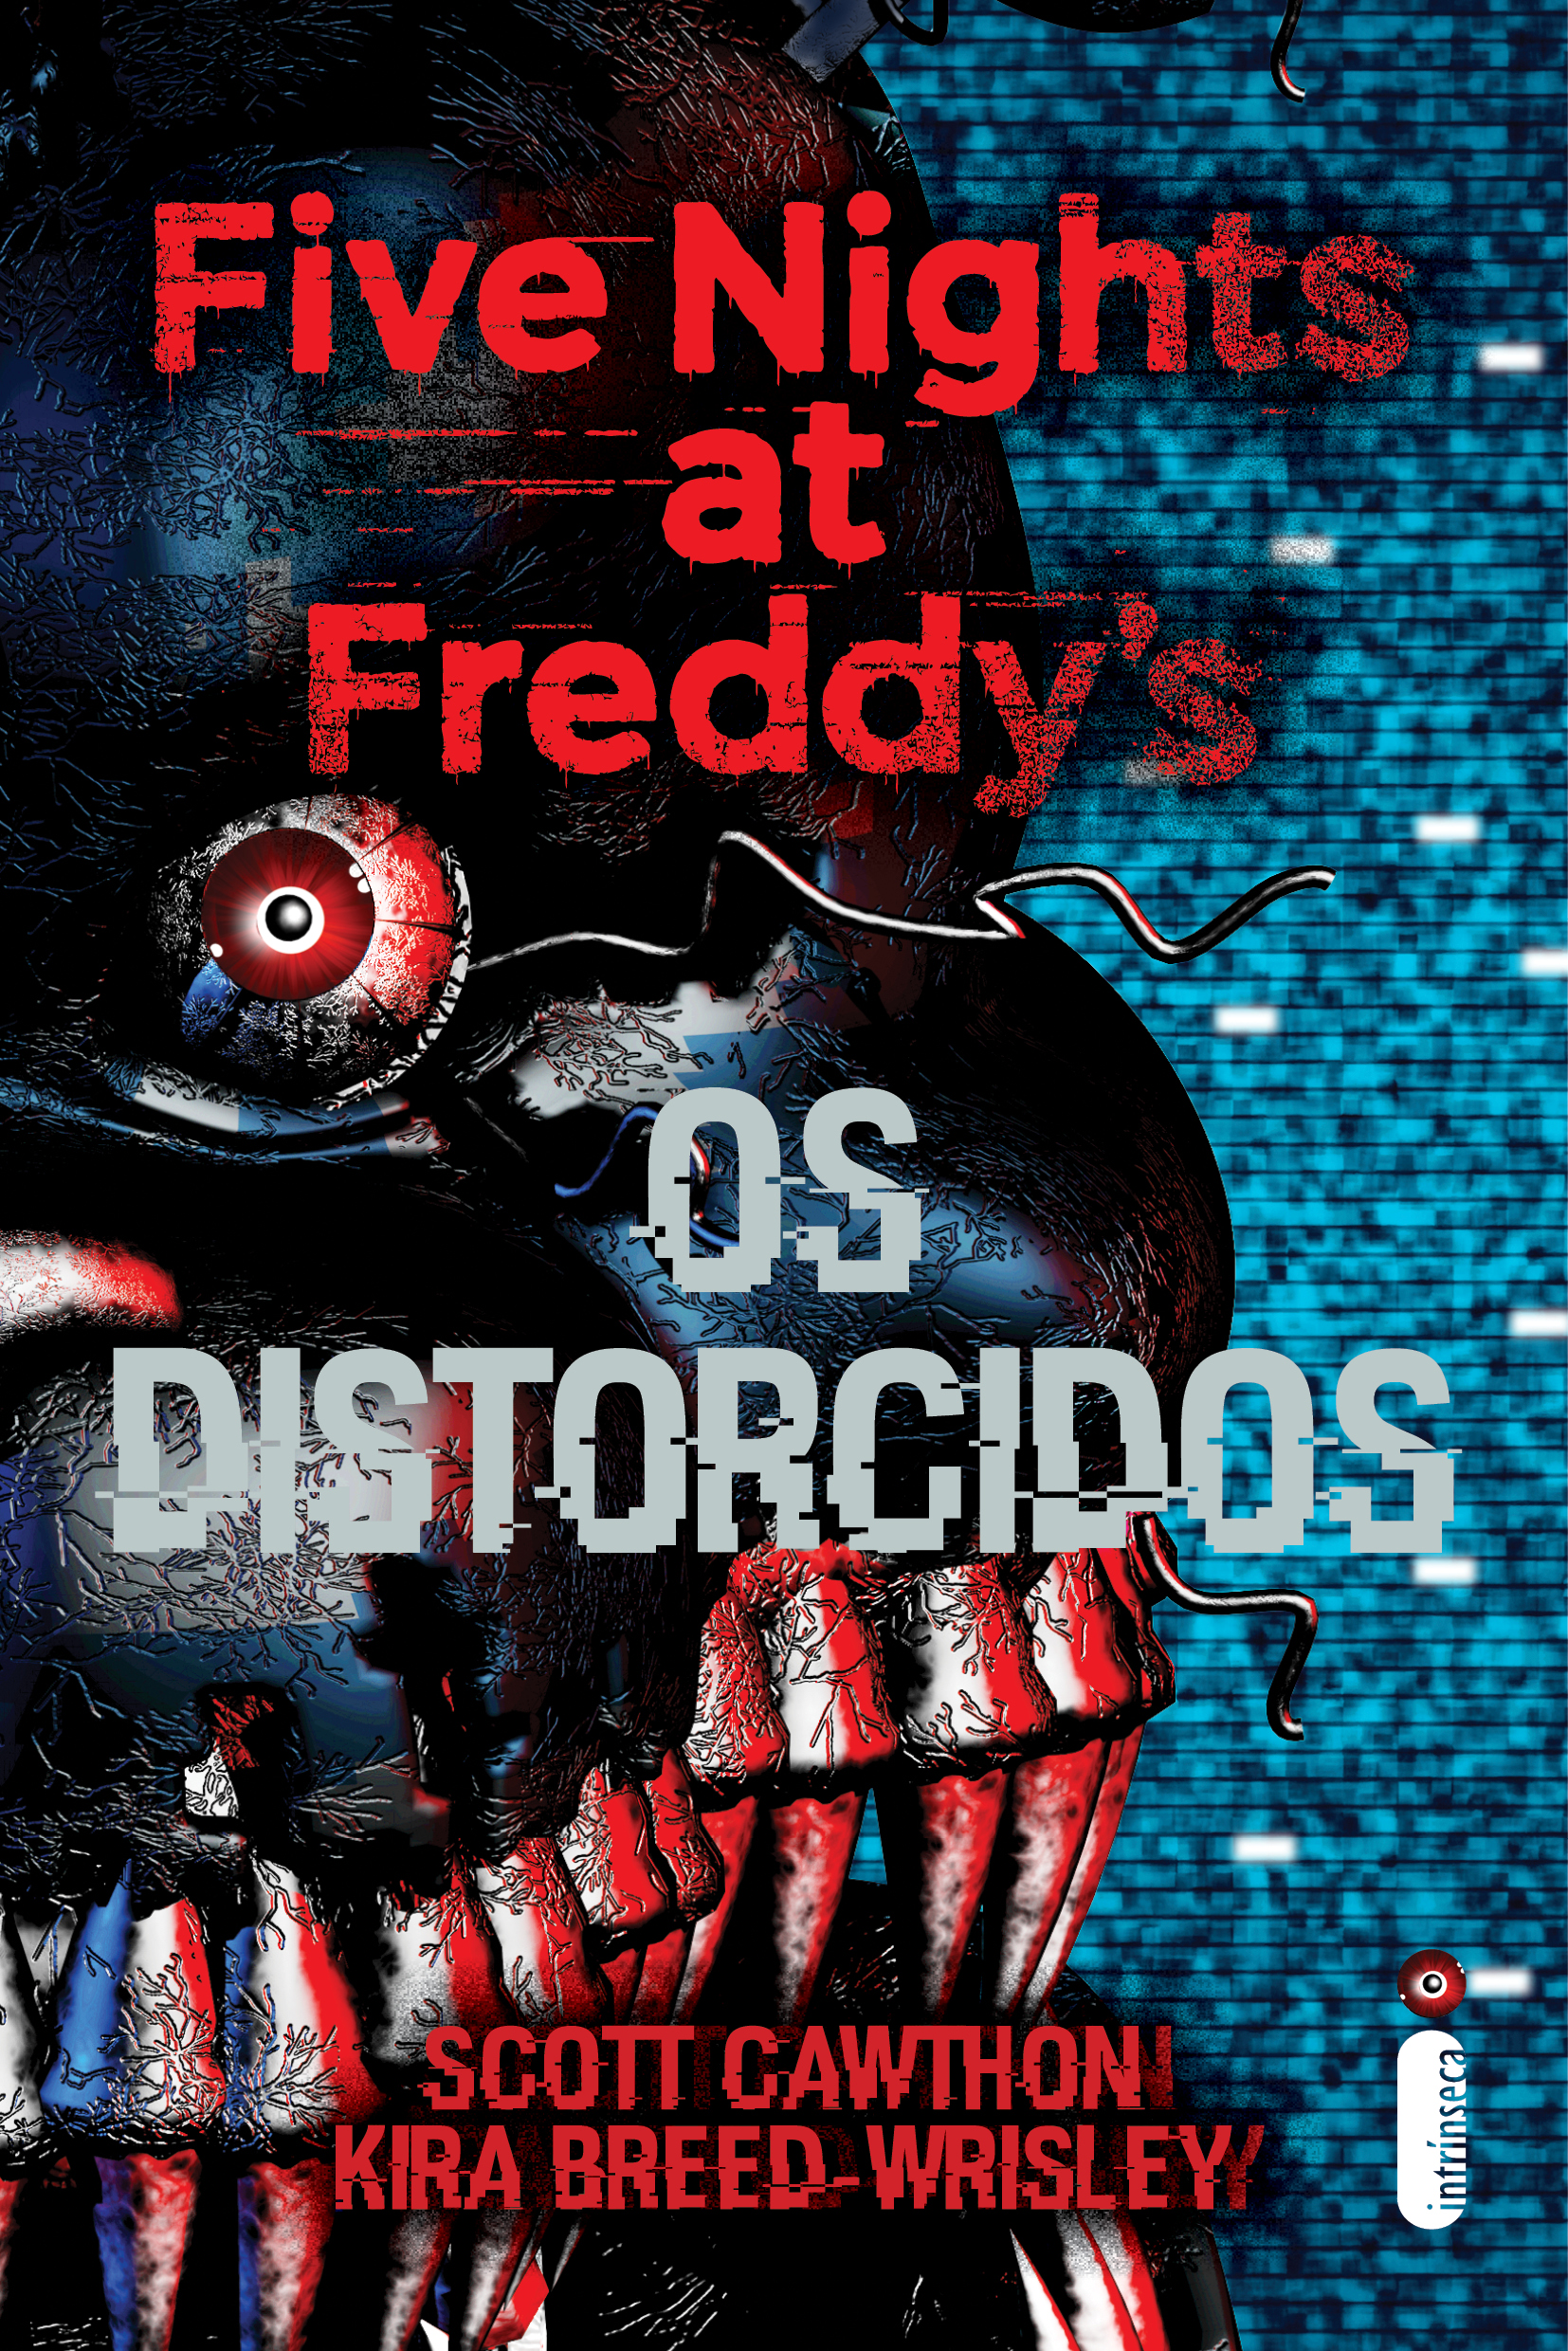 Five Nights at Freddy’s: Os distorcidos